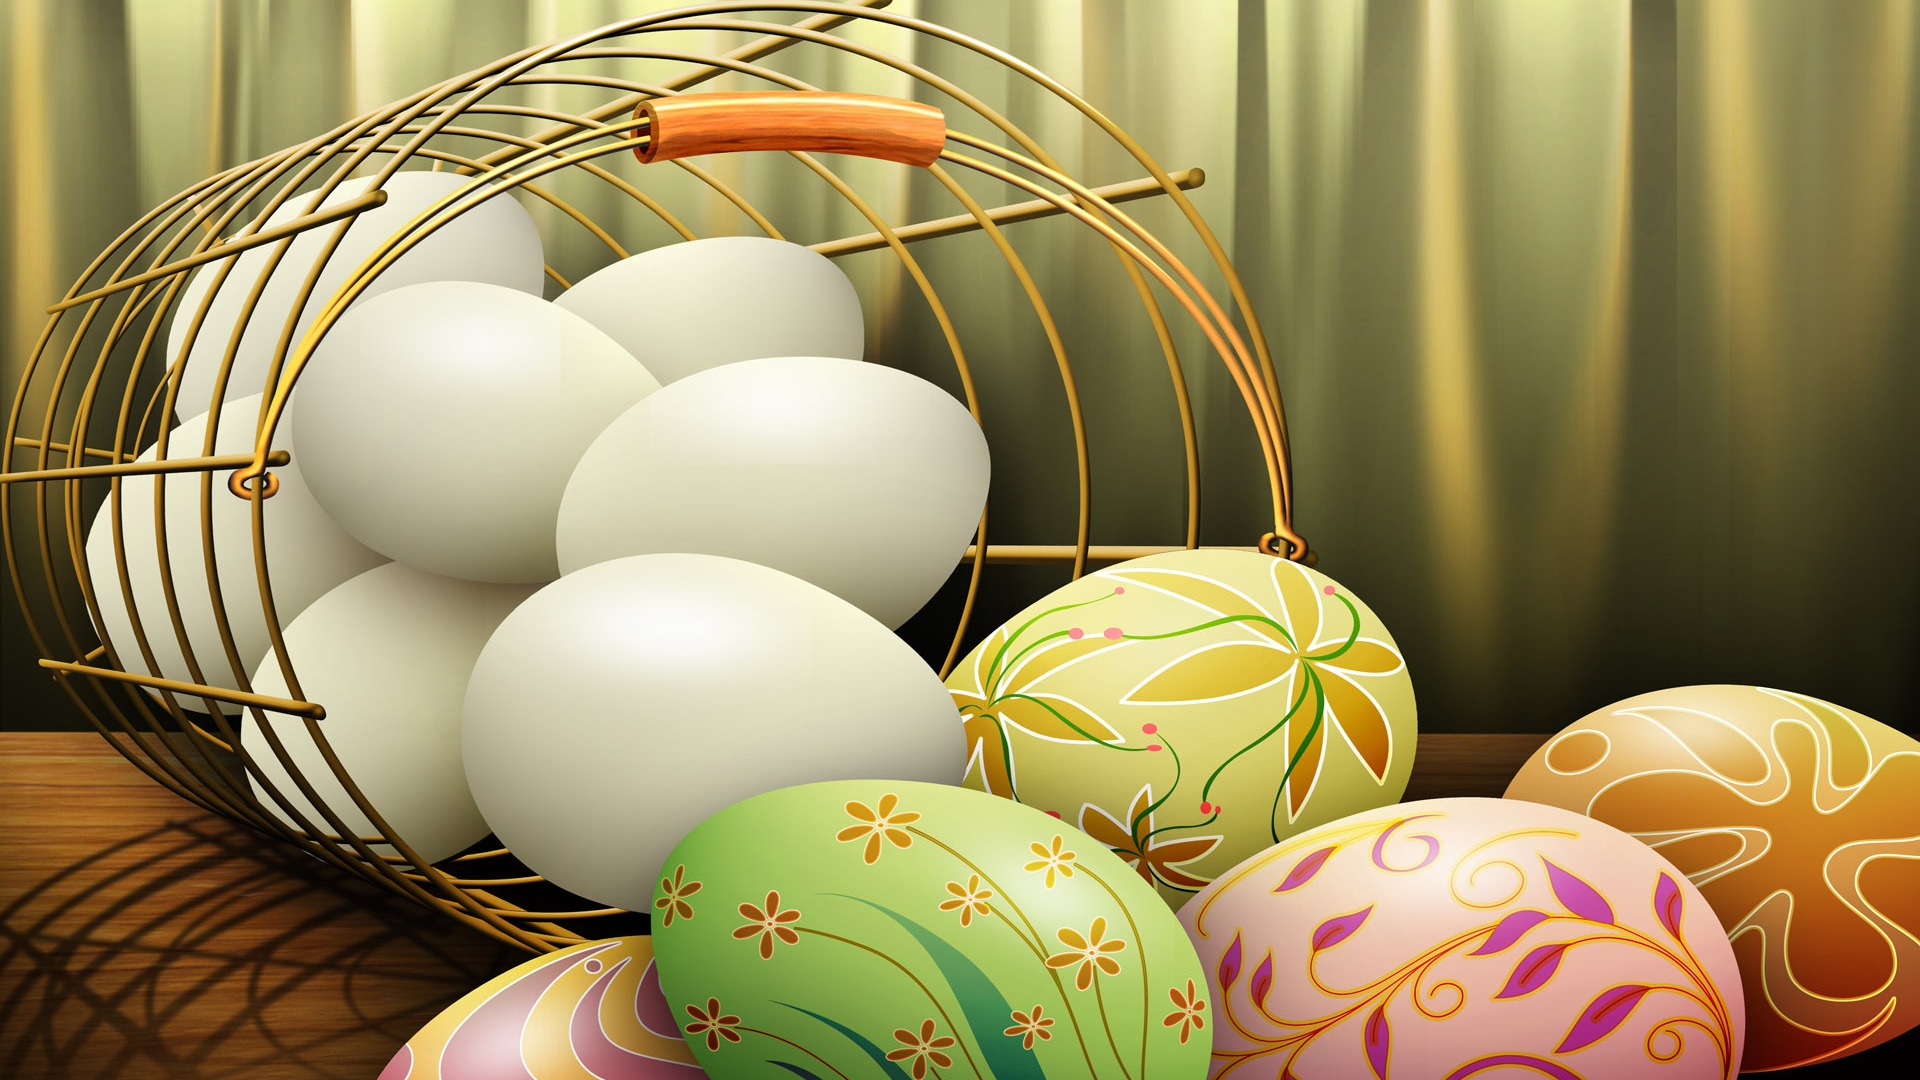 Beautiful Easter Eggs for 1920 x 1080 HDTV 1080p resolution